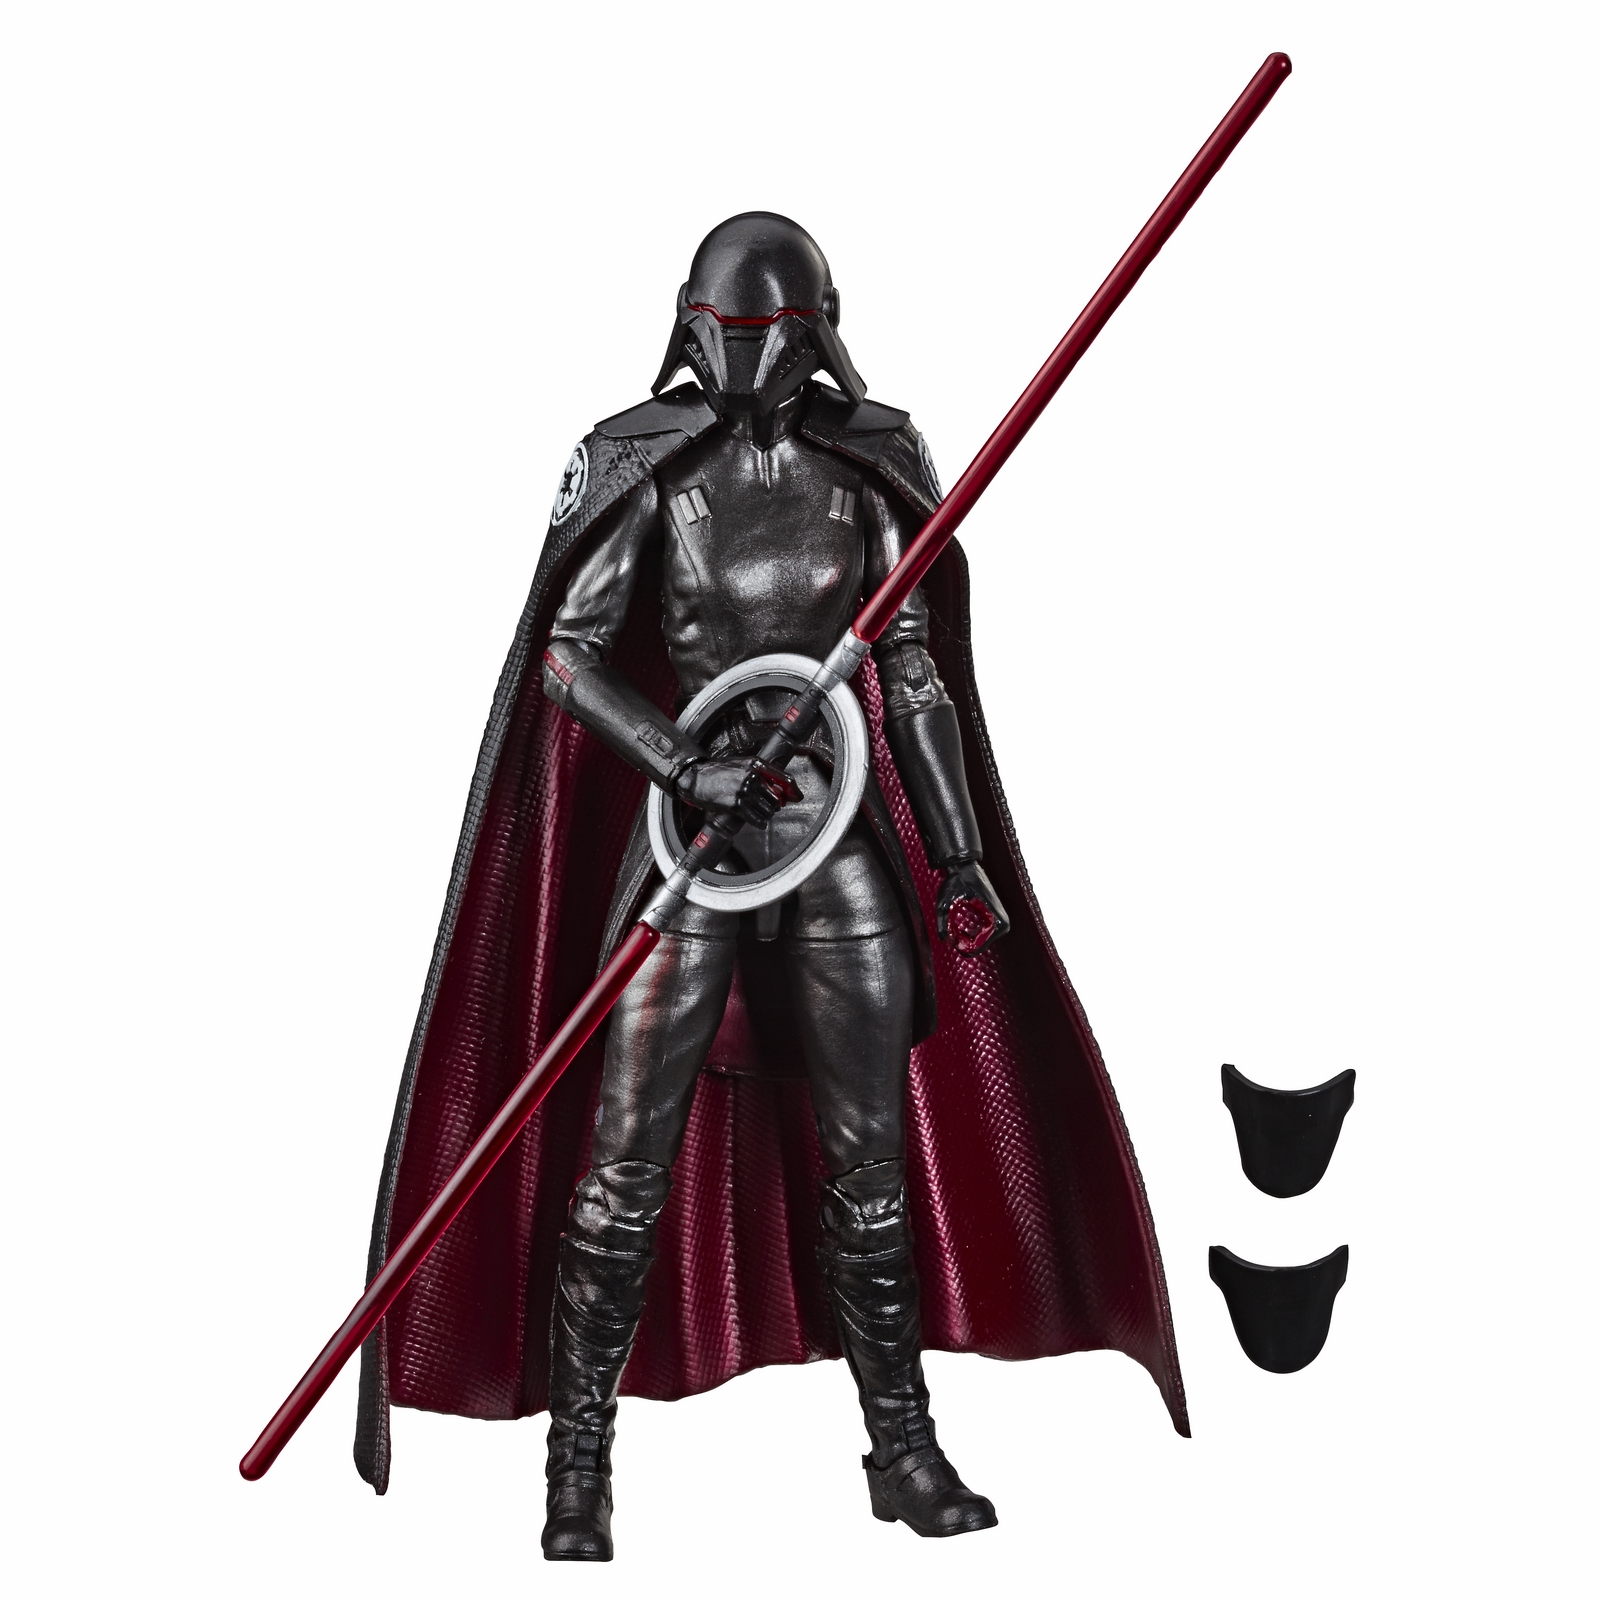 STAR WARS THE BLACK SERIES 6-INCH SECOND SISTER INQUISITOR CARBONIZED COLLECTION Figure - oop.jpg